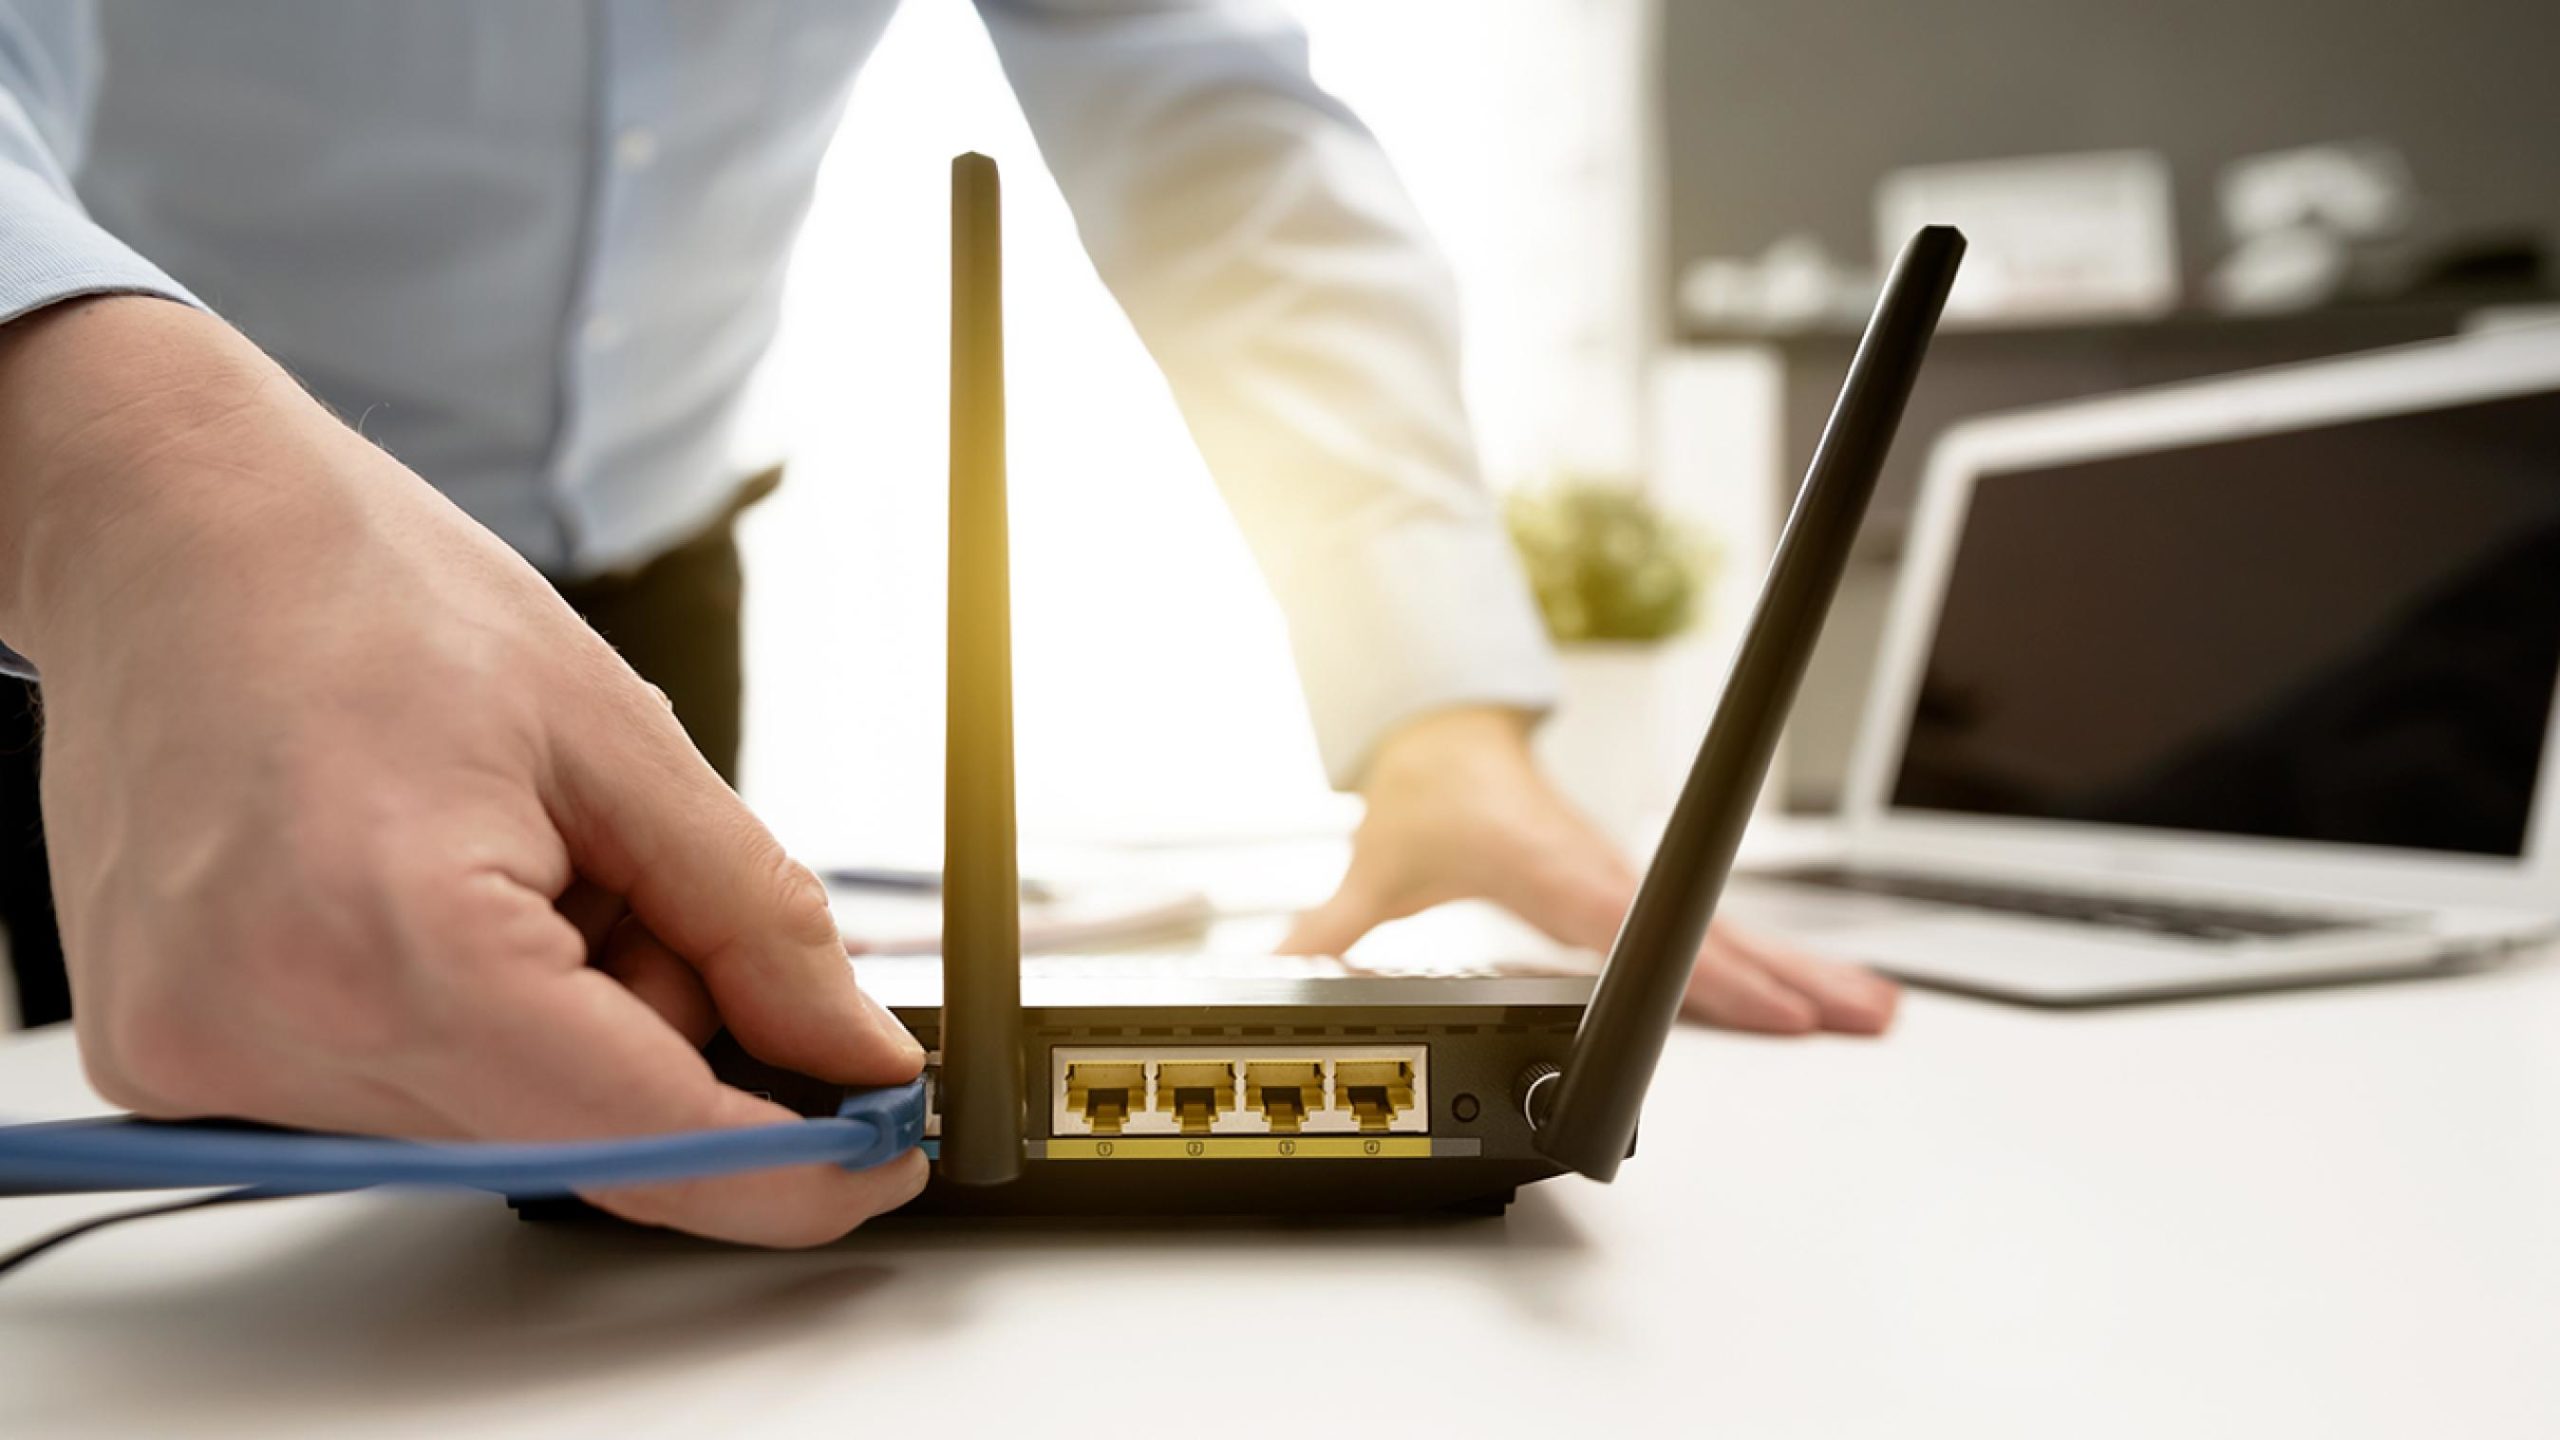 Six Quick and Easy Ways to Boost Your Router’s Performance